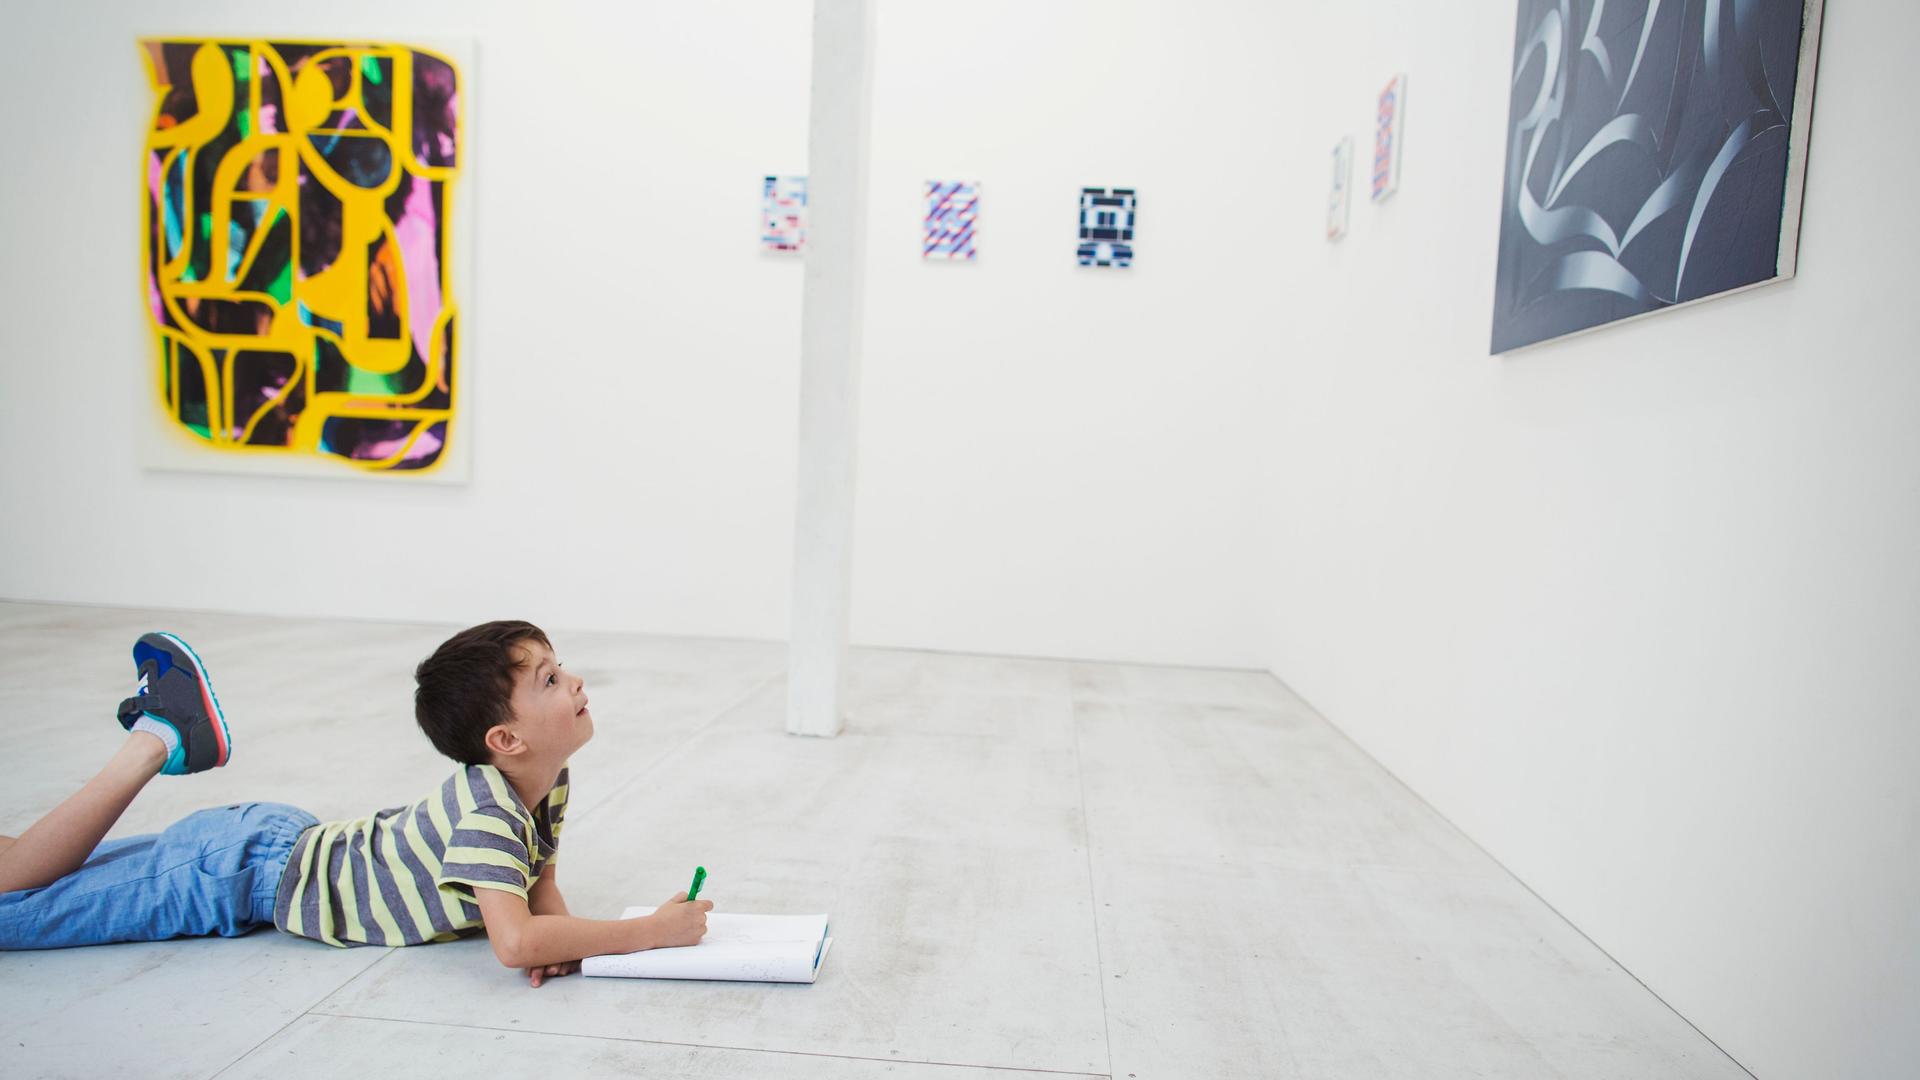 Boy with short black hair lying on floor in art gallery with pen and paper, looking at modern painting.